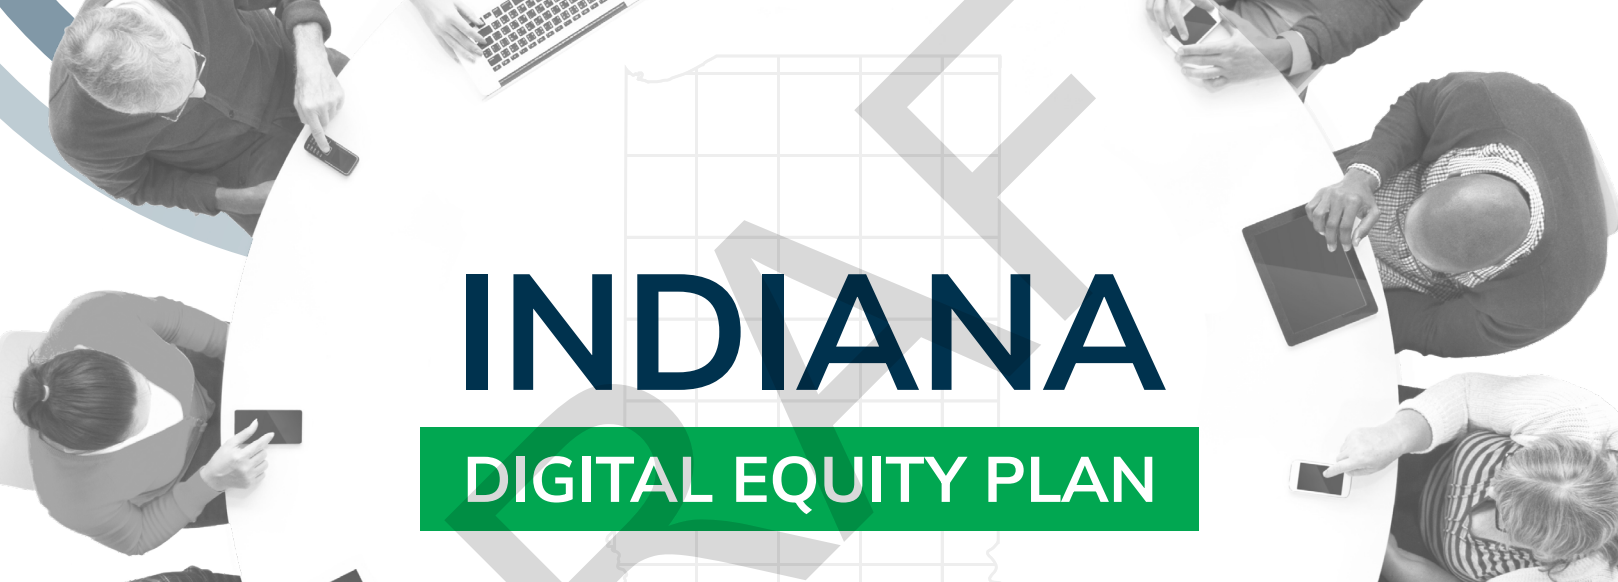 Indiana releases its draft Digital Equity Plan Thumbnail Image